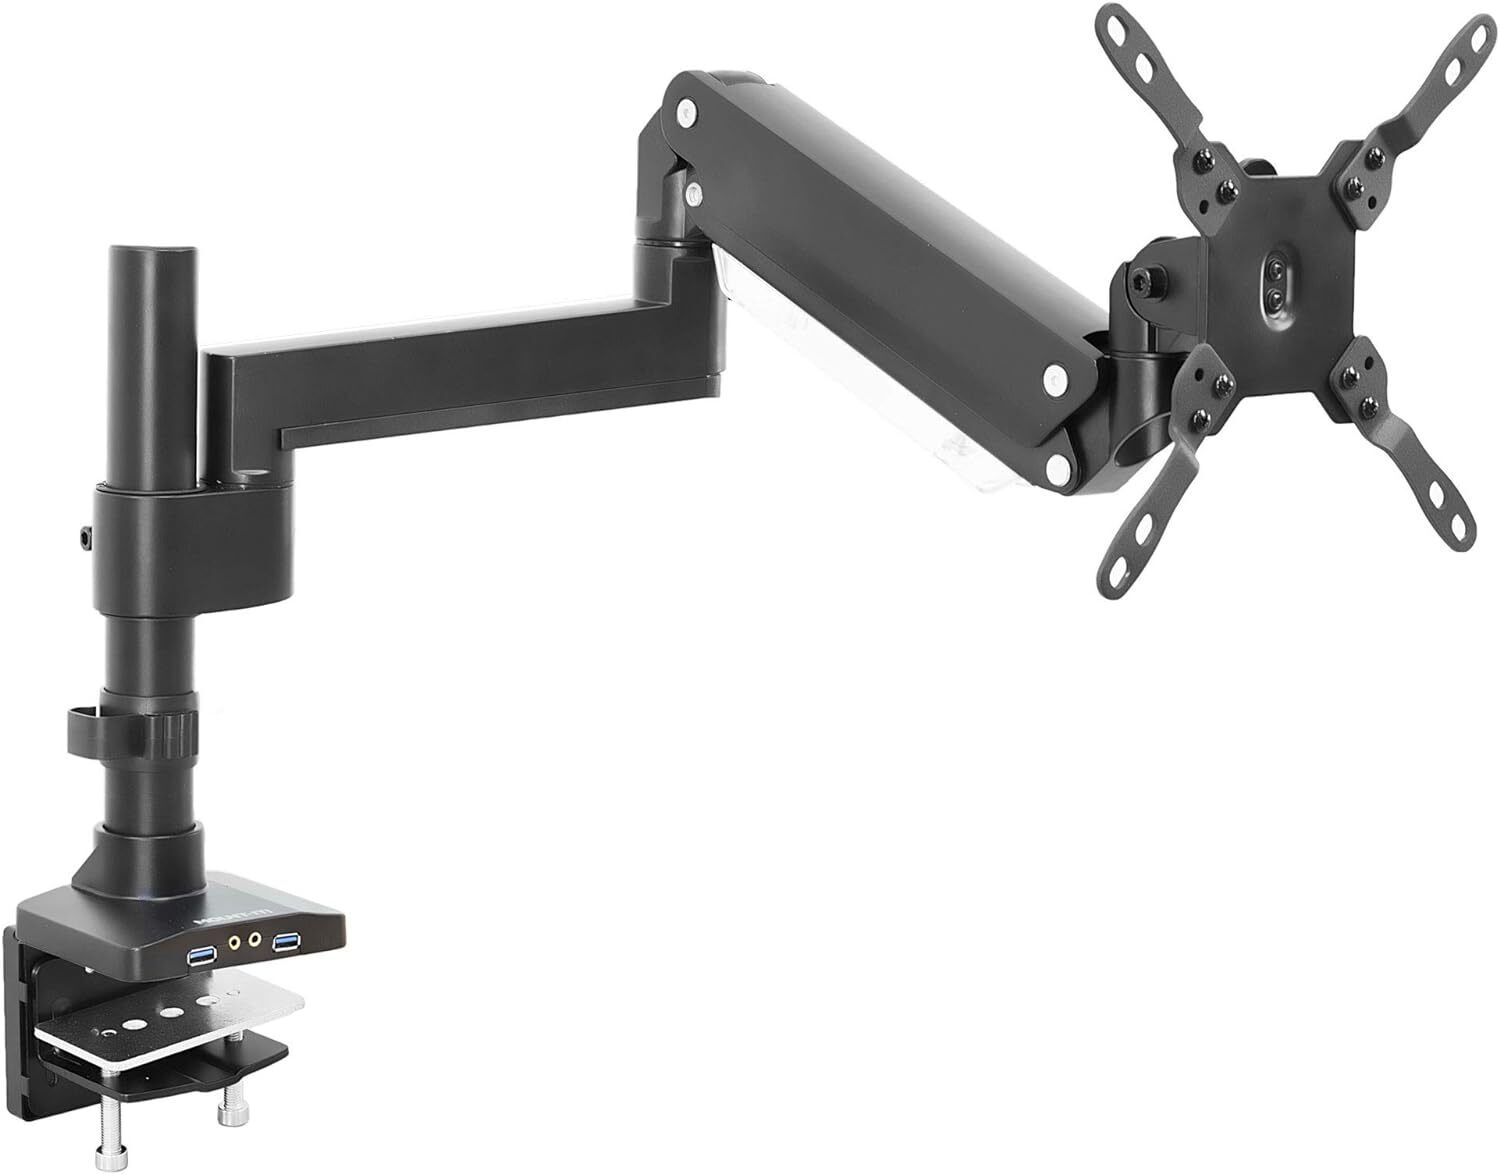 Mount-It Ultra Wide Single Monitor Desk Mount for Monitors up to 35in +35lb